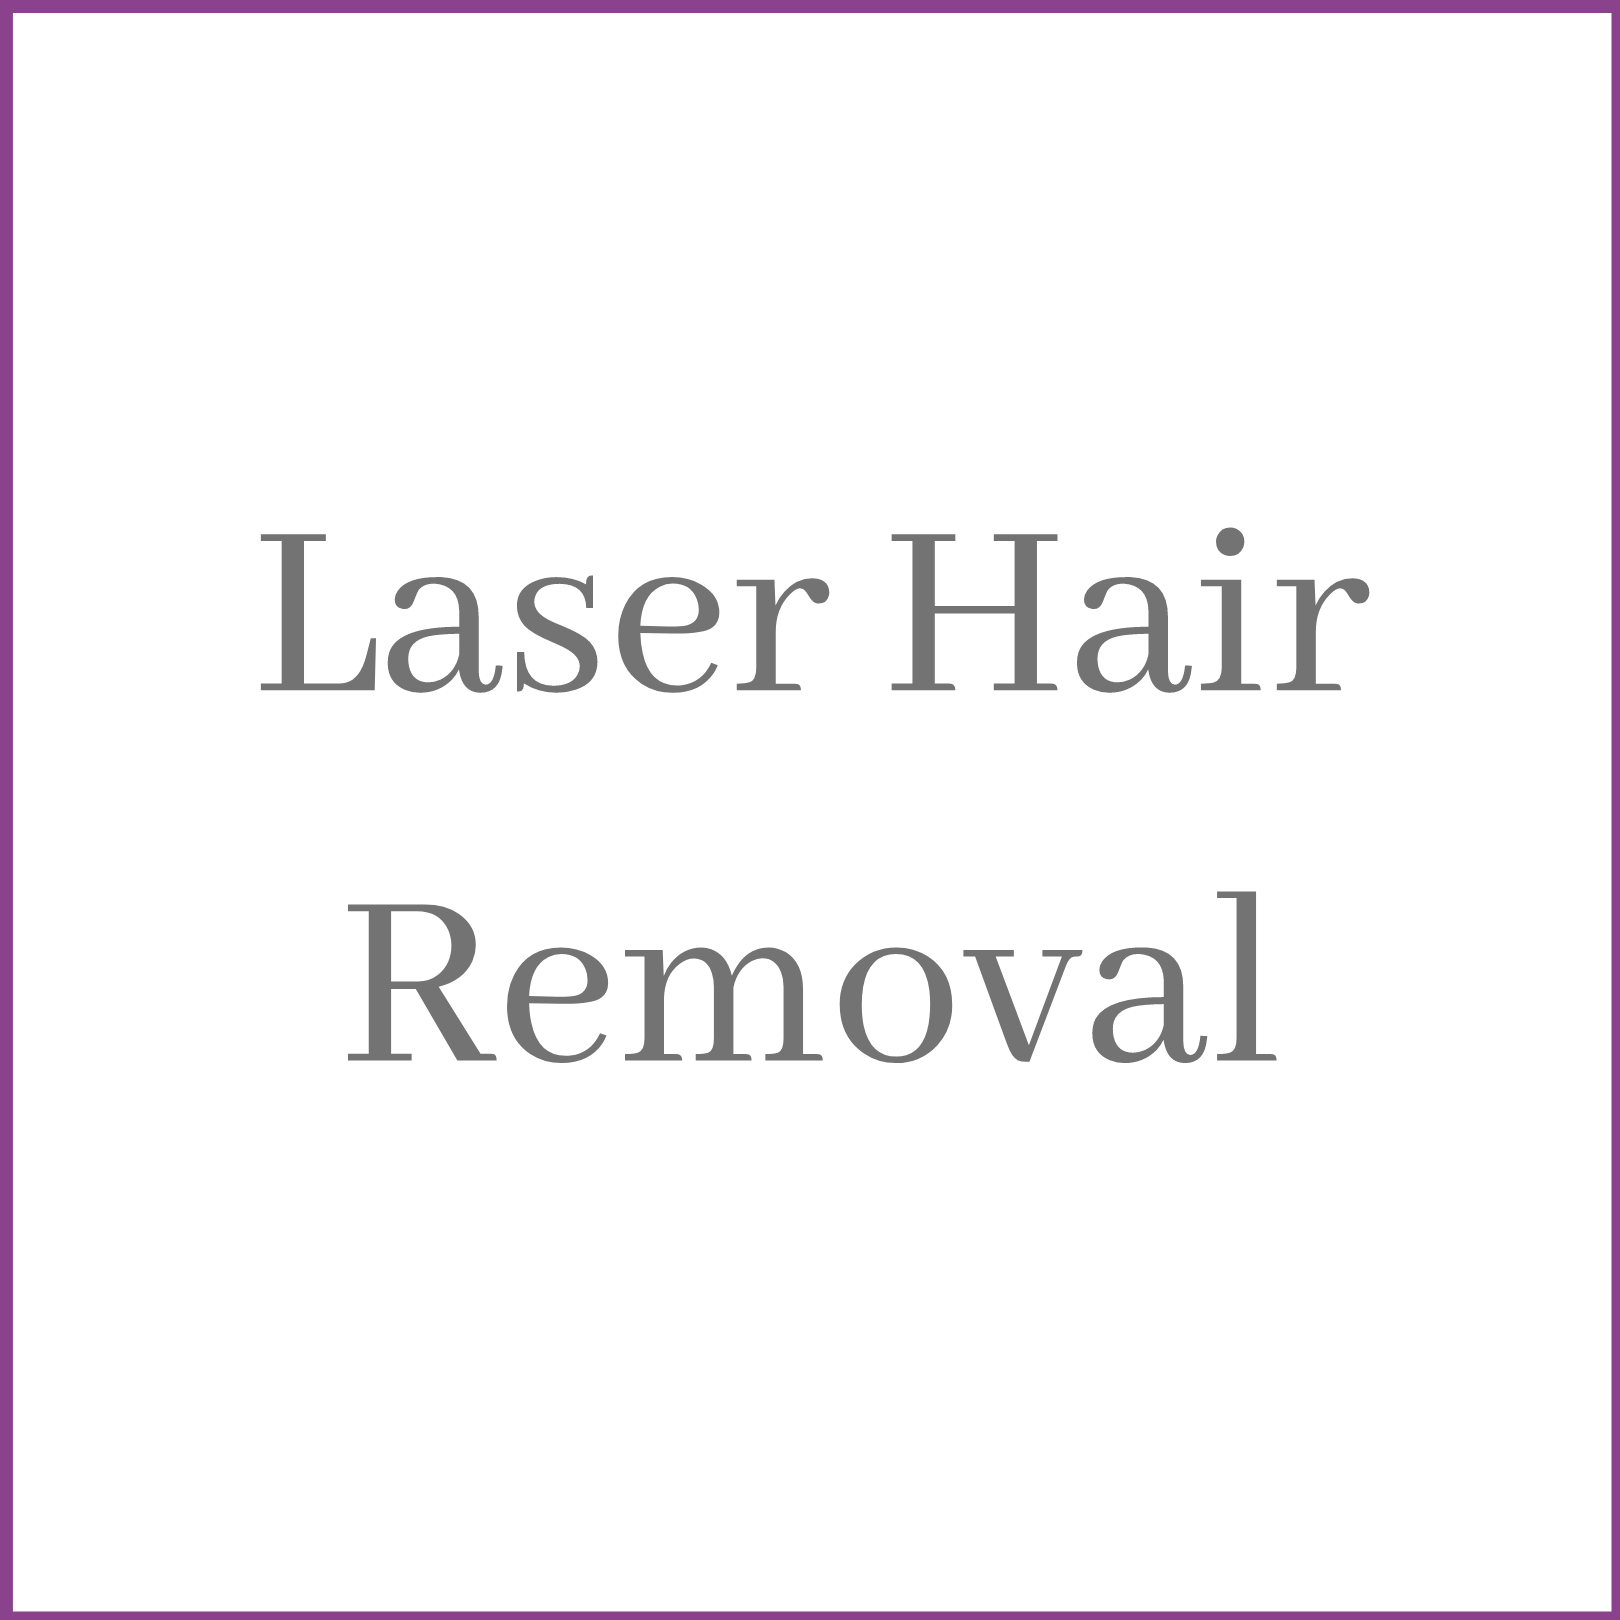 Laser Hair Removal Aftercare Advice